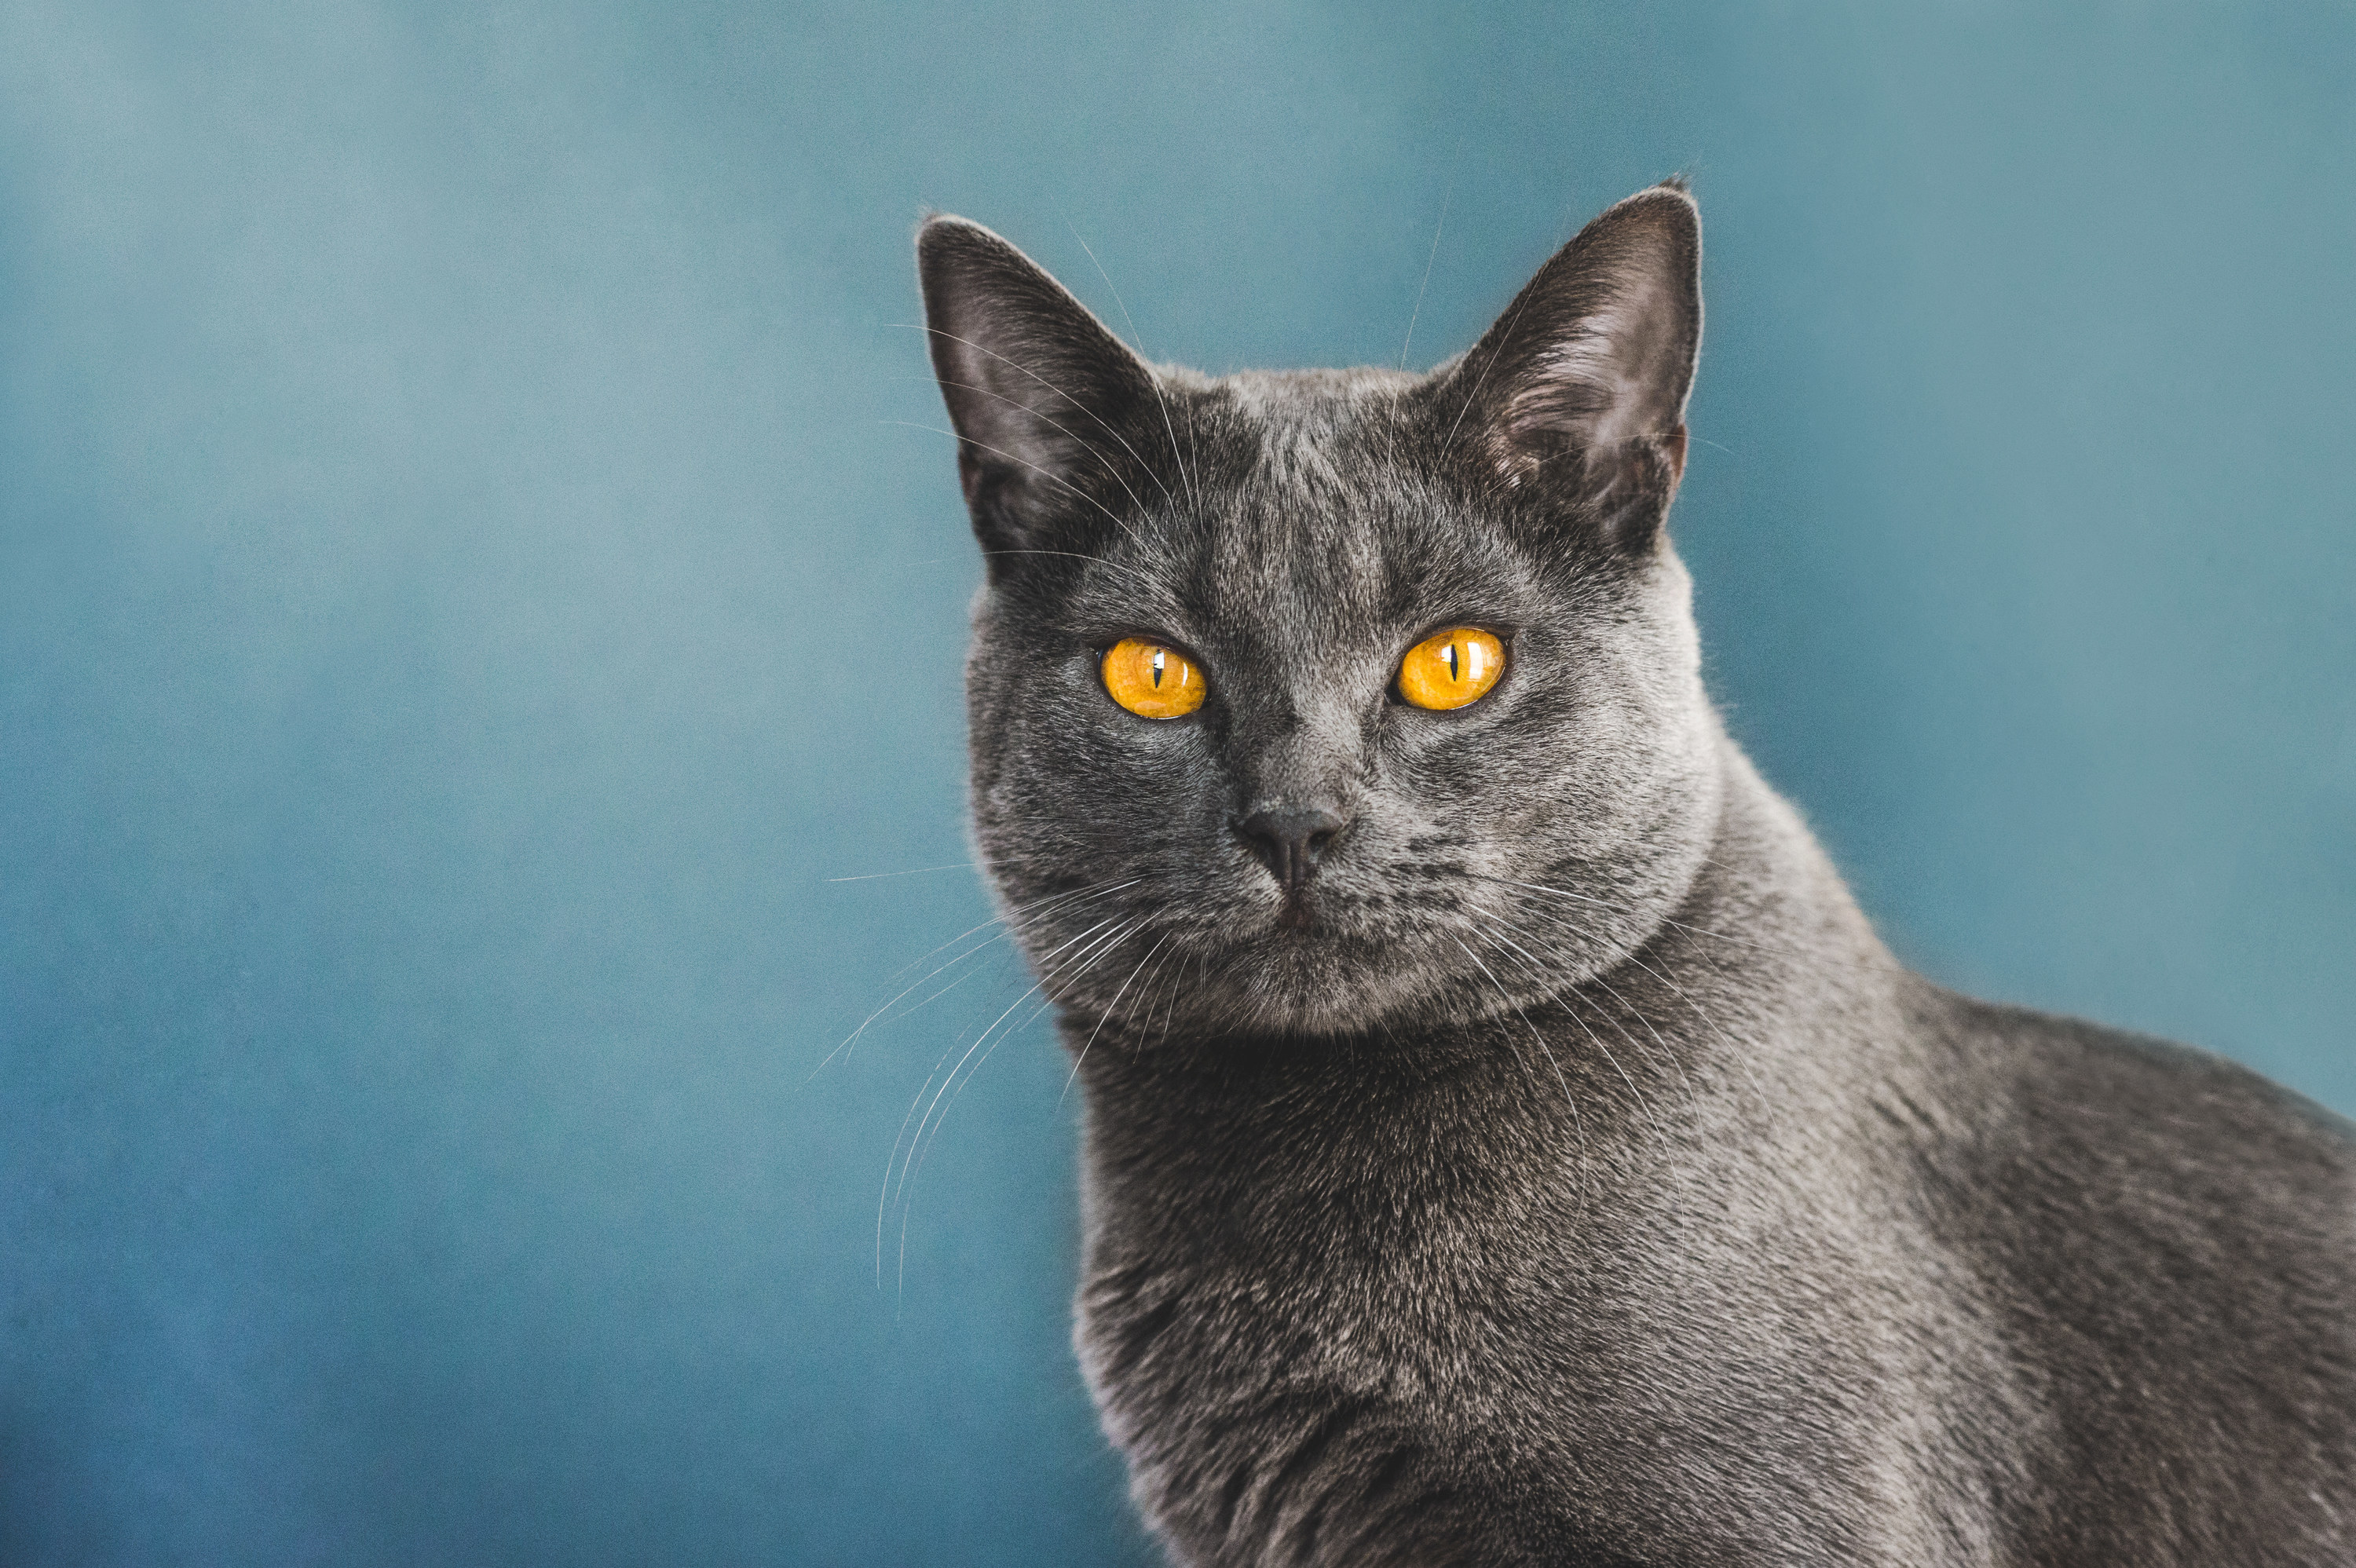 Portrait Of A Beautiful One And A Half Year Old Chartreux Cat Against Blue Background